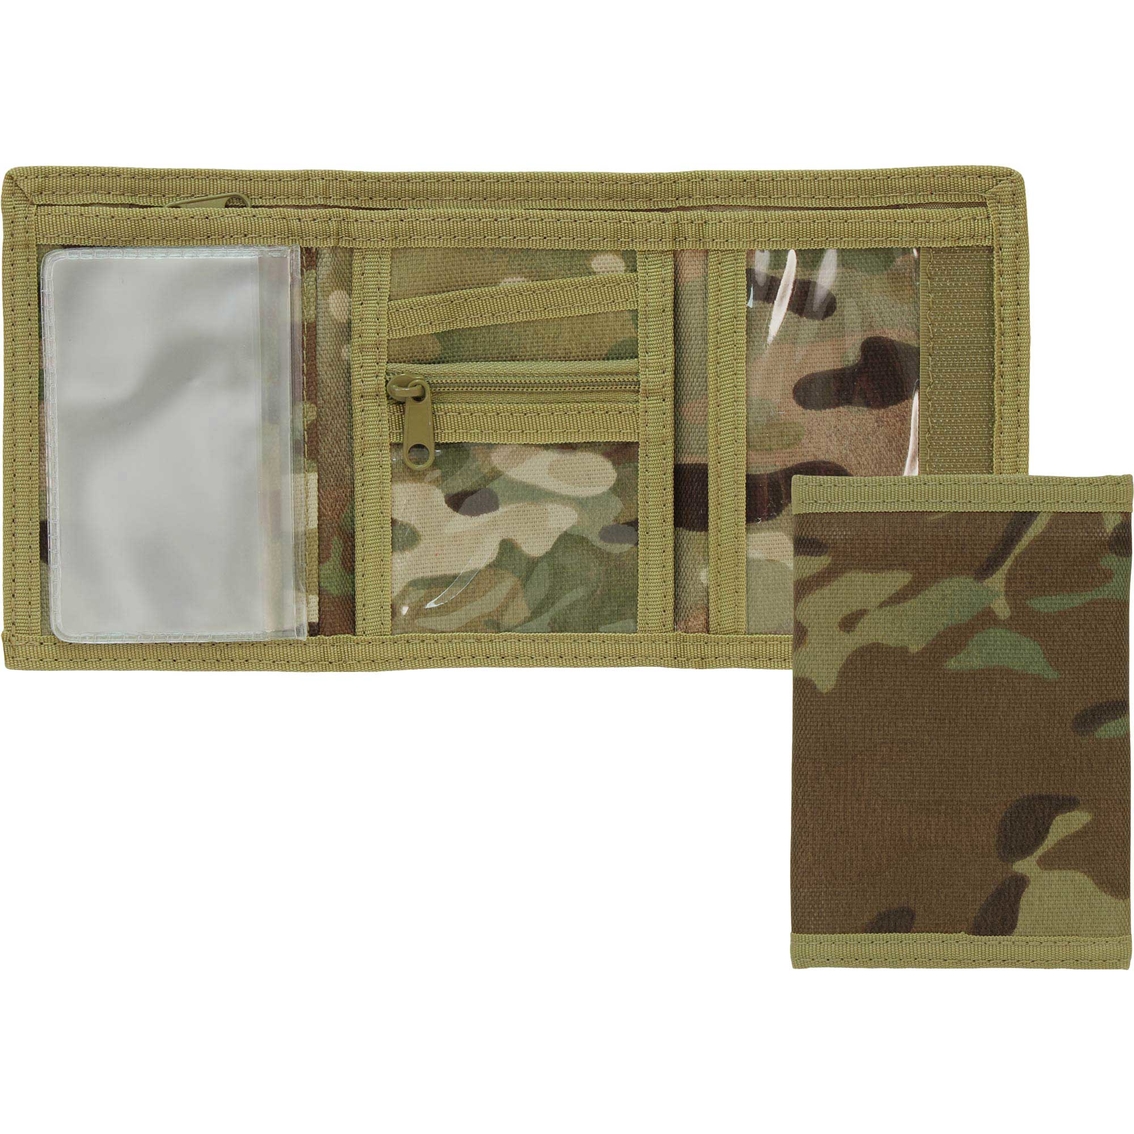 Tri-fold Camouflage Men's Wallet ARMY Camo Wallet NEW 